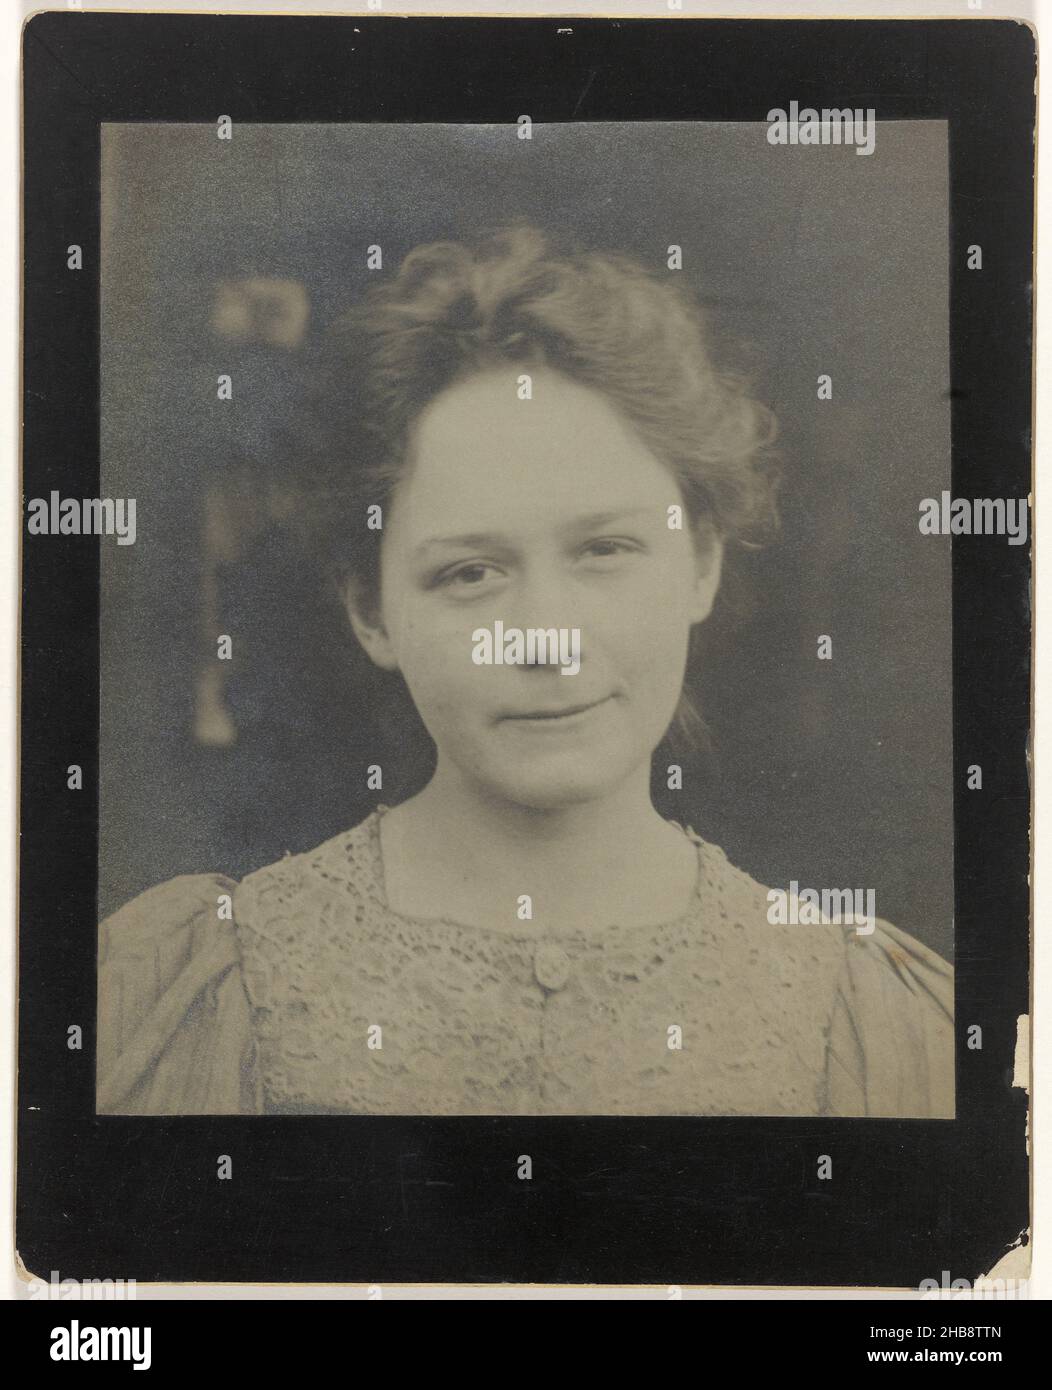 Portrait of Lucie Broedelet, Lucie Broedelet (title on object), Willem Witsen (attributed to), Amsterdam, 1897, paper, gelatin silver print, height 195 mm × width 168 mmheight 248 mm × width 197 mm Stock Photo